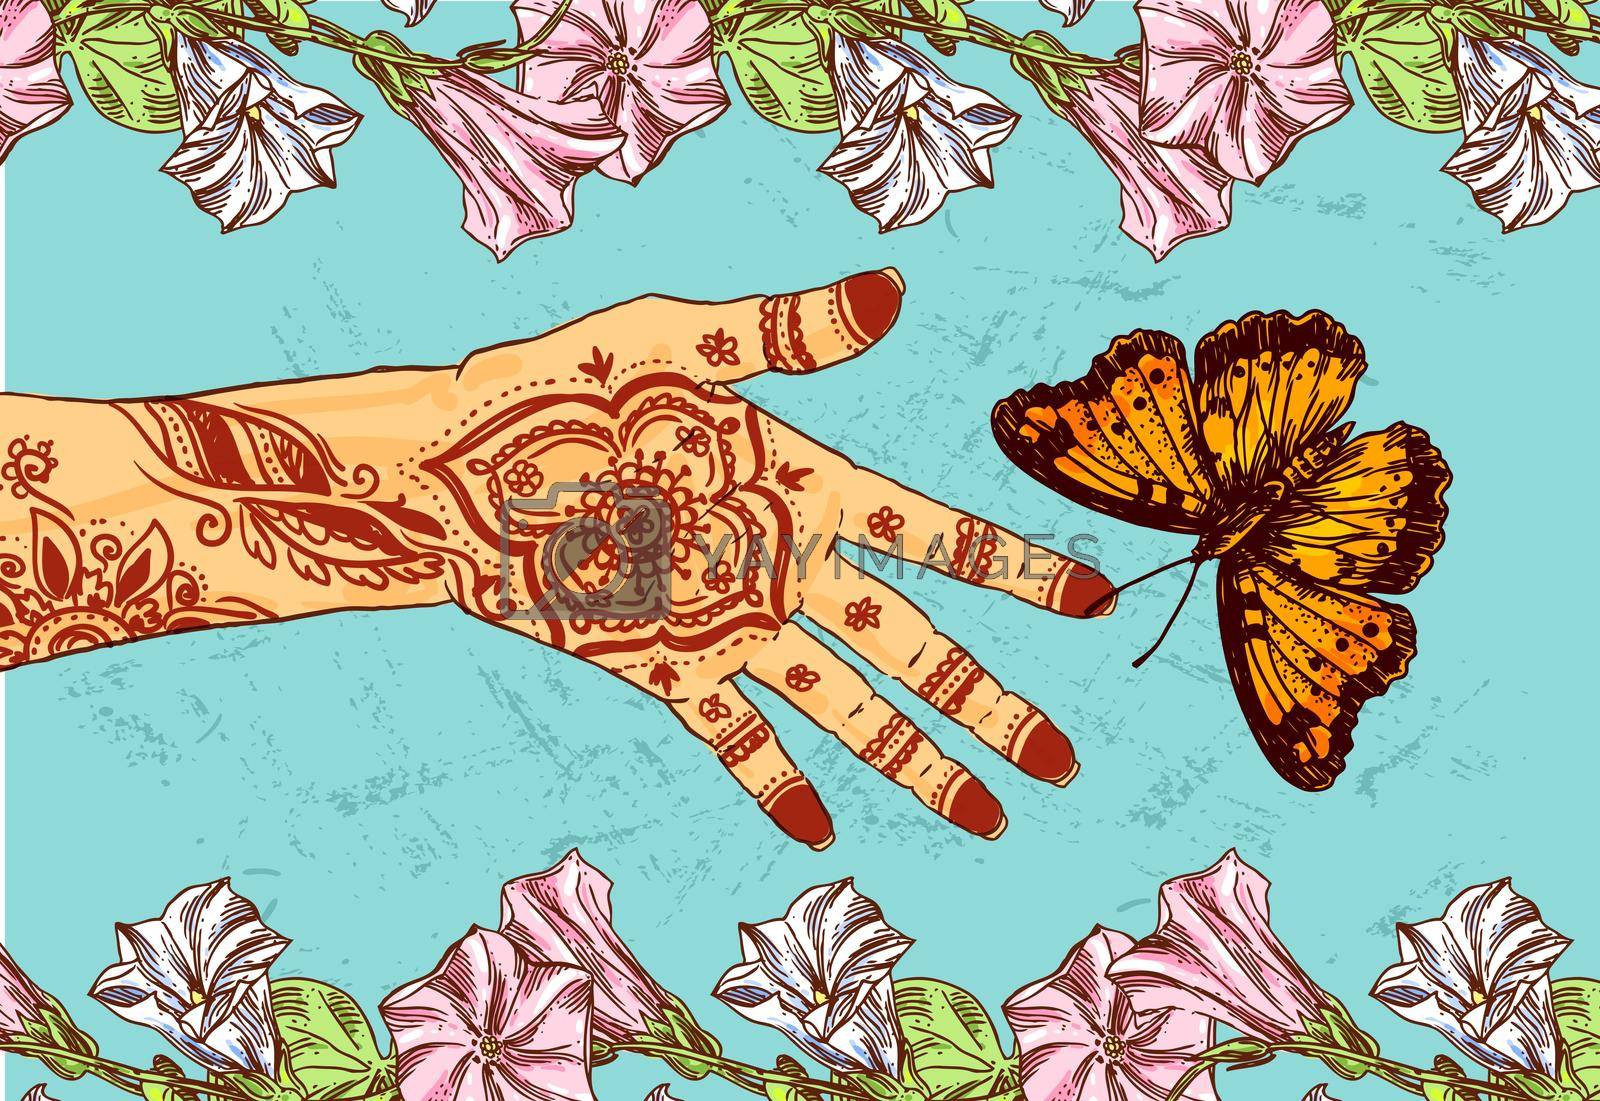 Royalty free image of hand and butterfly by steshnikova